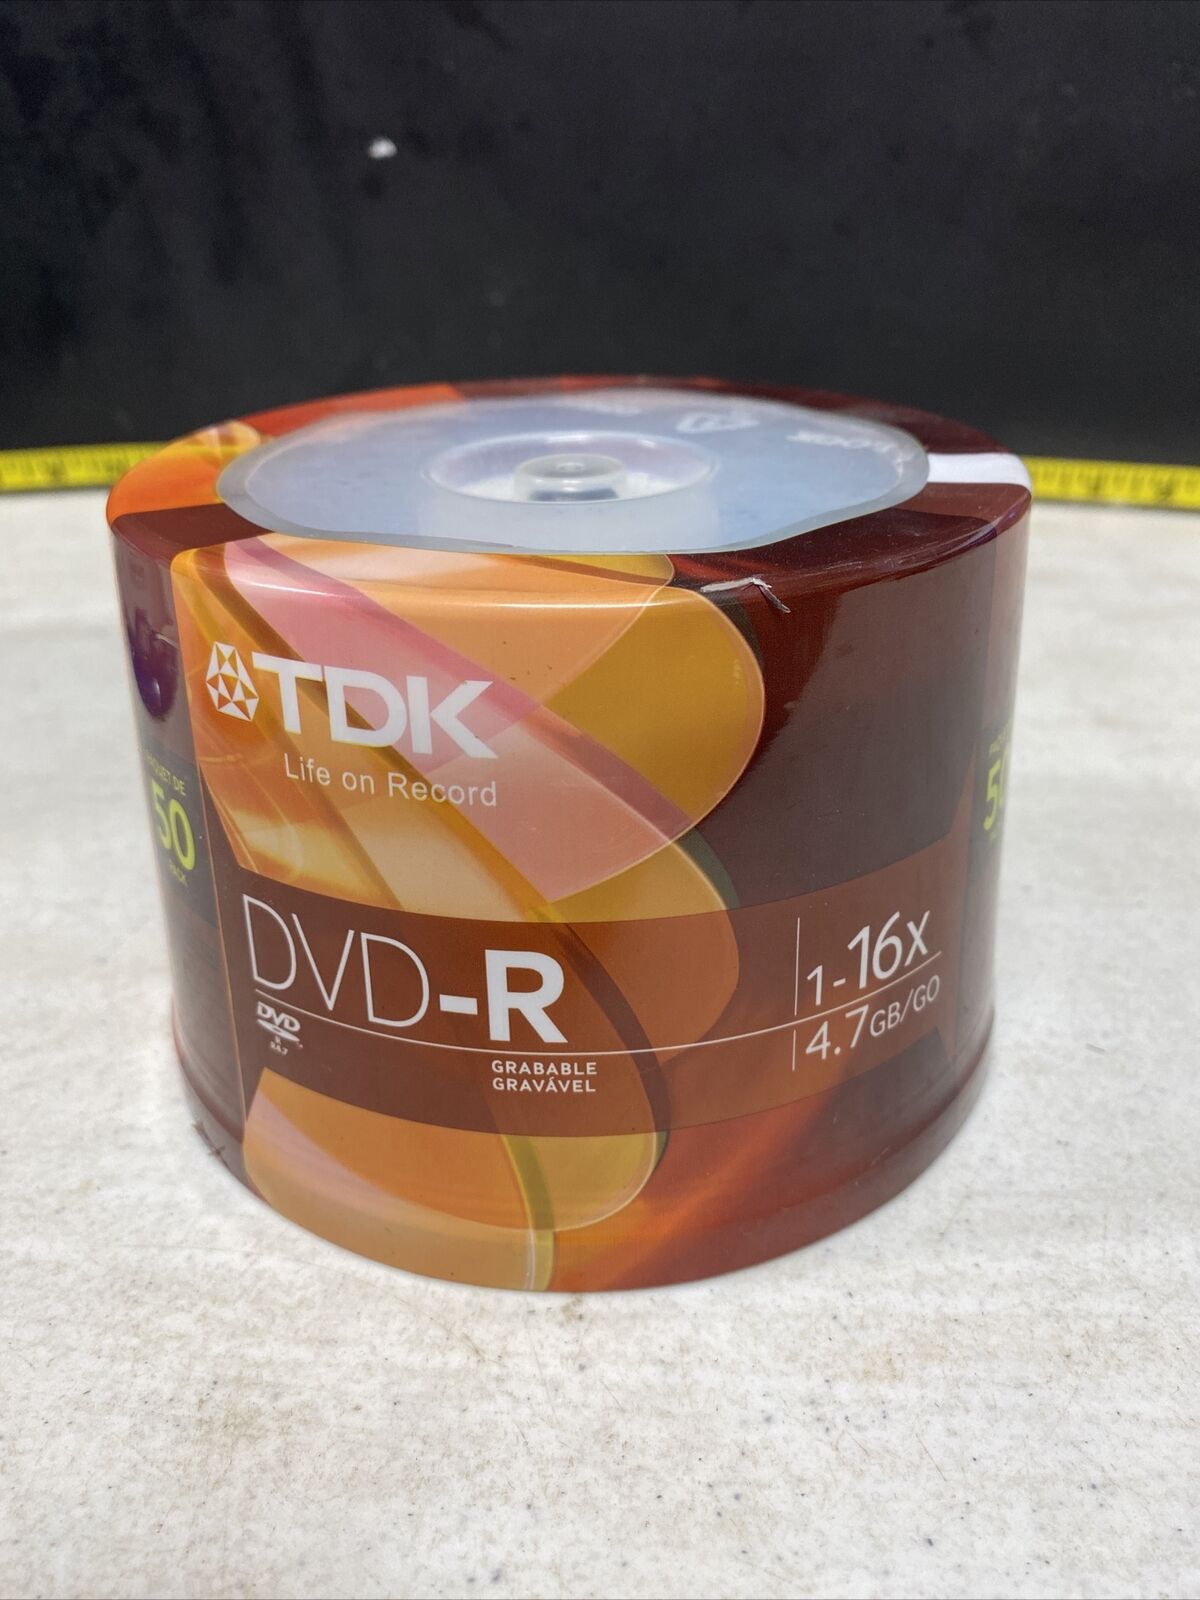 New Sealed TDK DVD-R 50 Pack 1-16x 4.7GB Recordable Discs Spindle Orange Pack